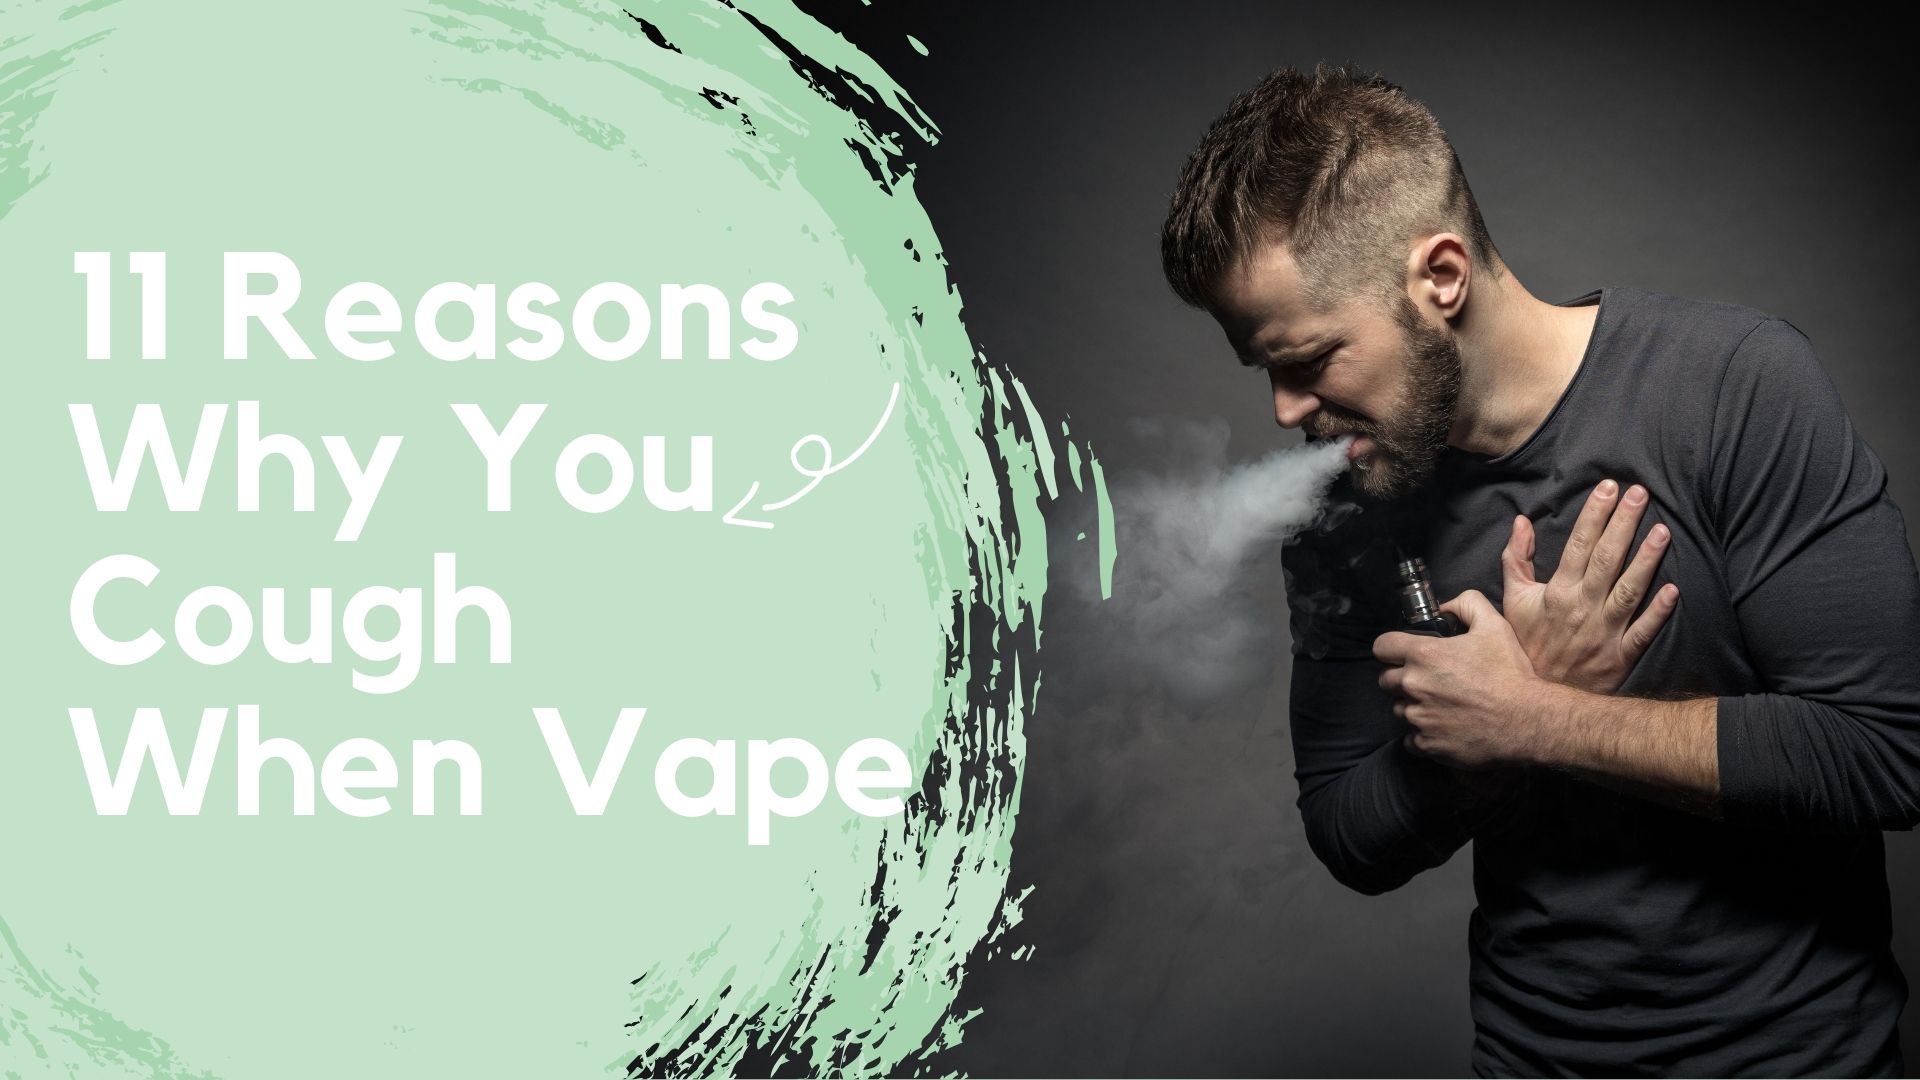 Why does vaping make me cough?